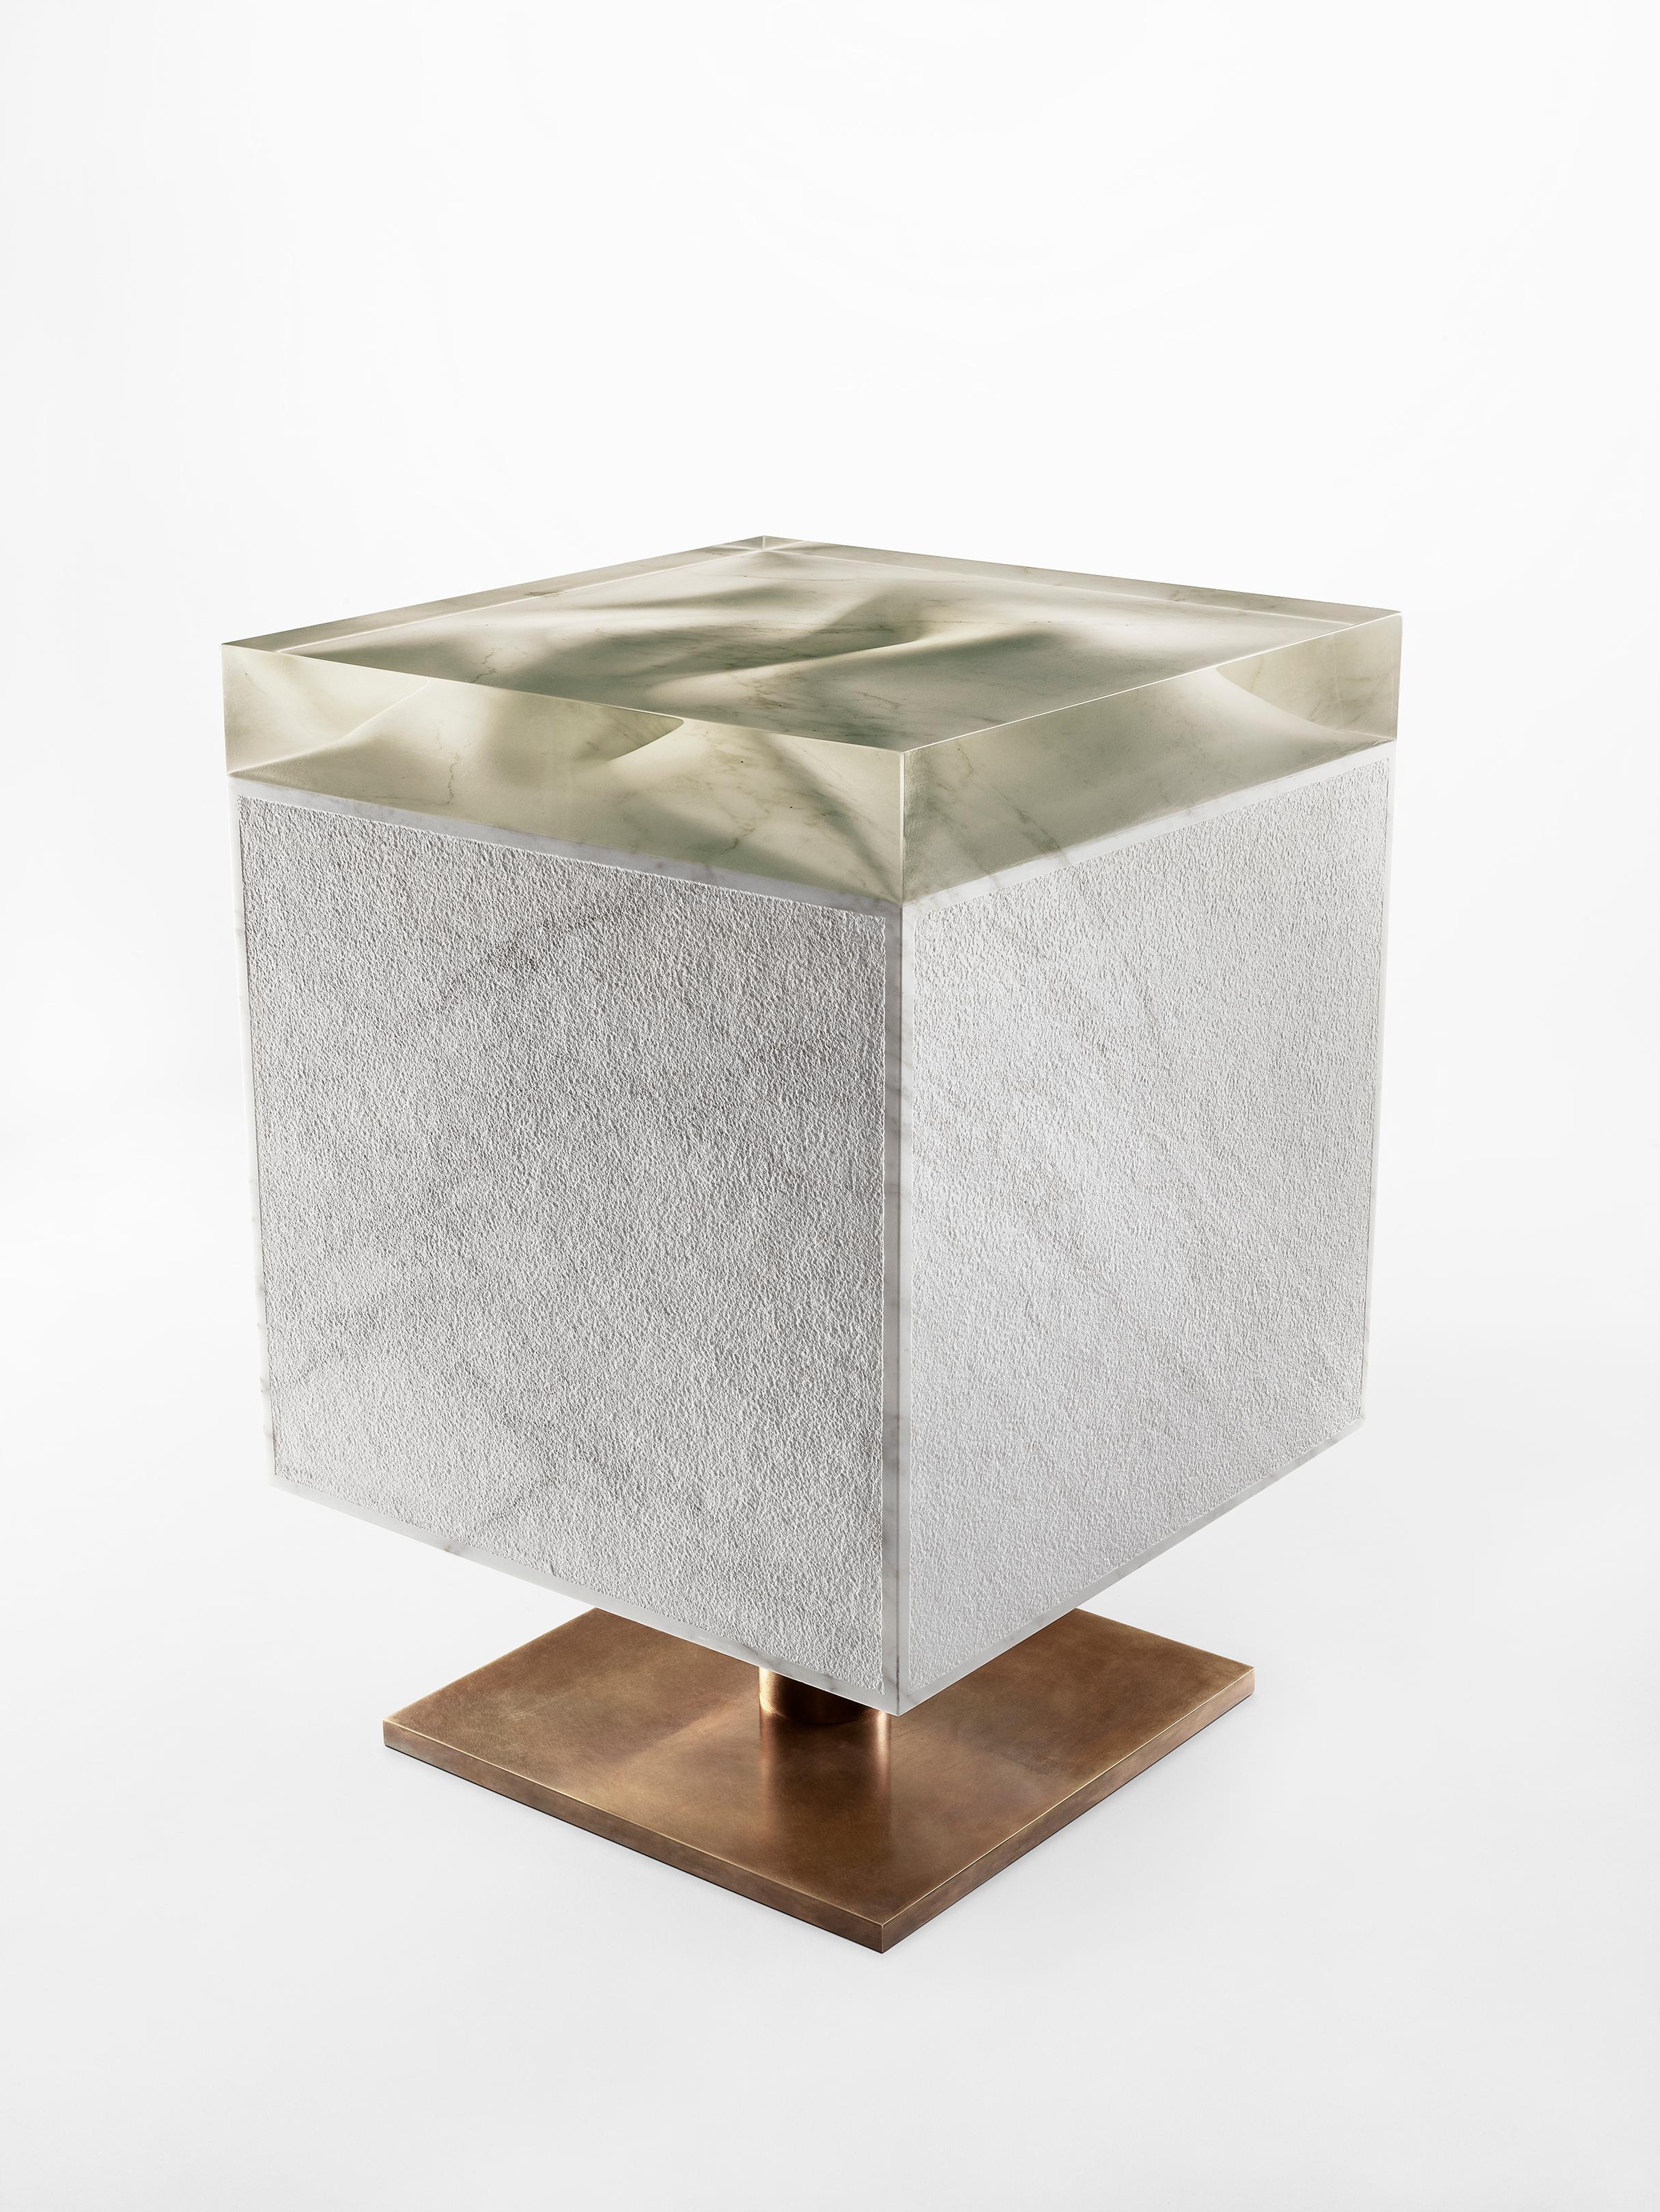 Marble cube table by Jonathan Hansen
12 Editions + 1 AP
Dimensions: 40.6 x 40.6 x 58.4 cm
Materials: Calacatta marble, architectural bronze, Resin


SERIES I CAPTUM BIOMORFE is a group of nine sculpture works created by New York artist